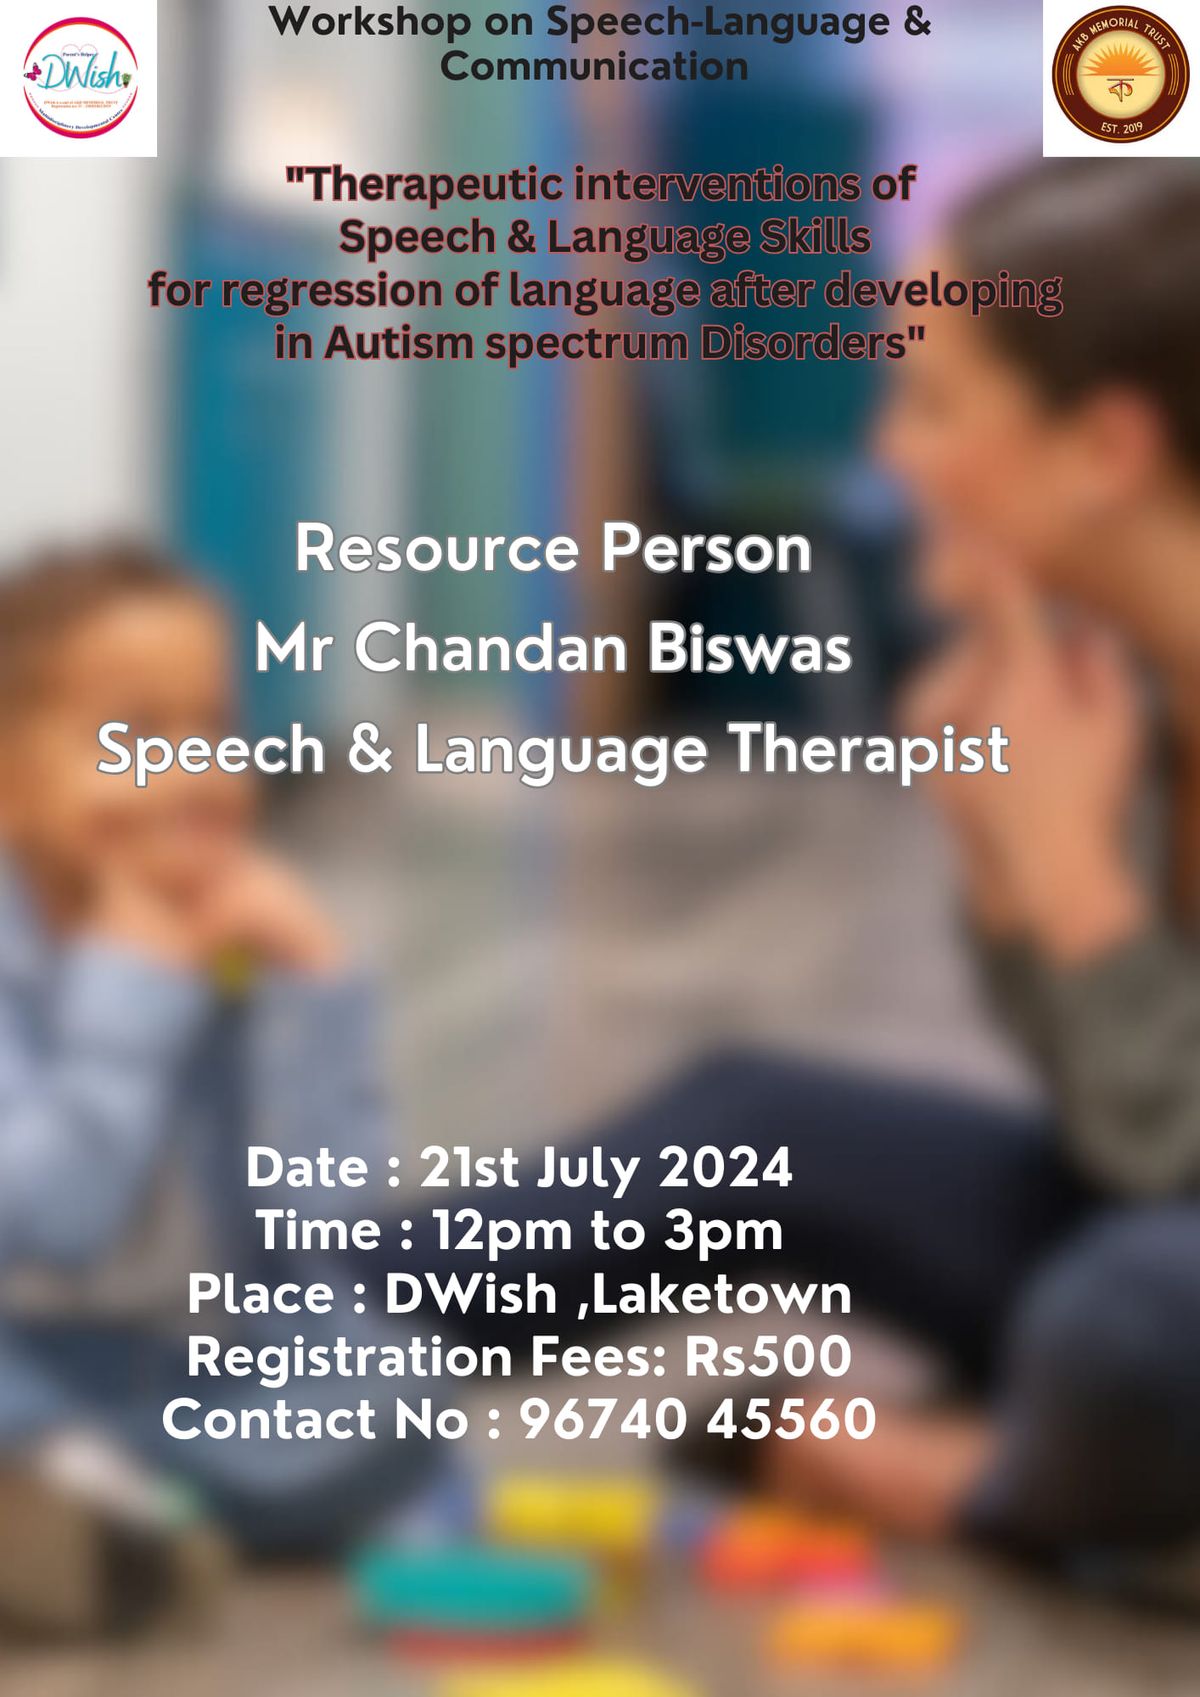 Therapeutic interventions of Speech&Language skills for regression in ASD 